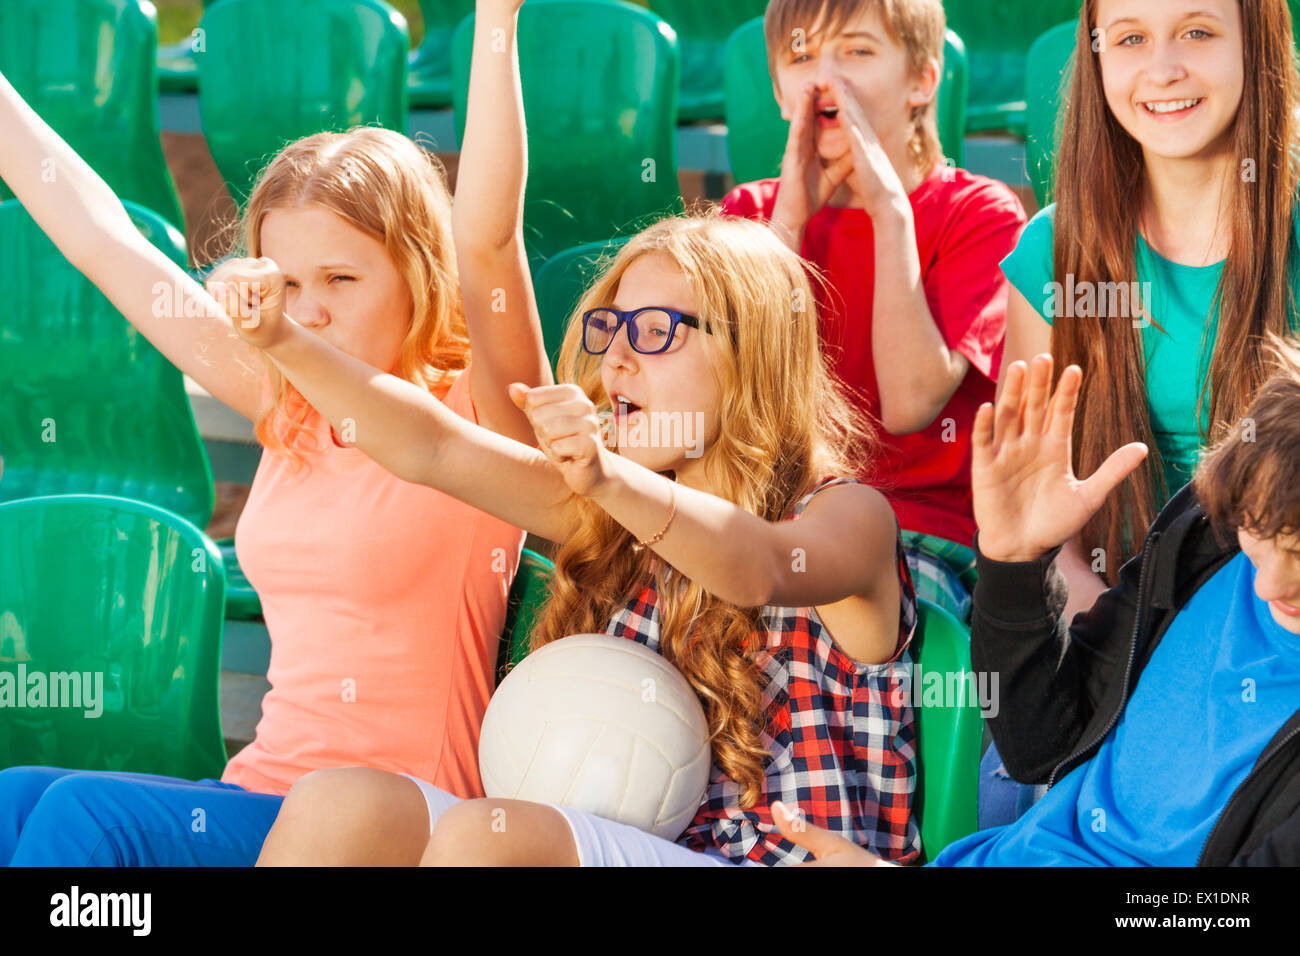 Teenagers cheer for team during game at stadium Stock Photo